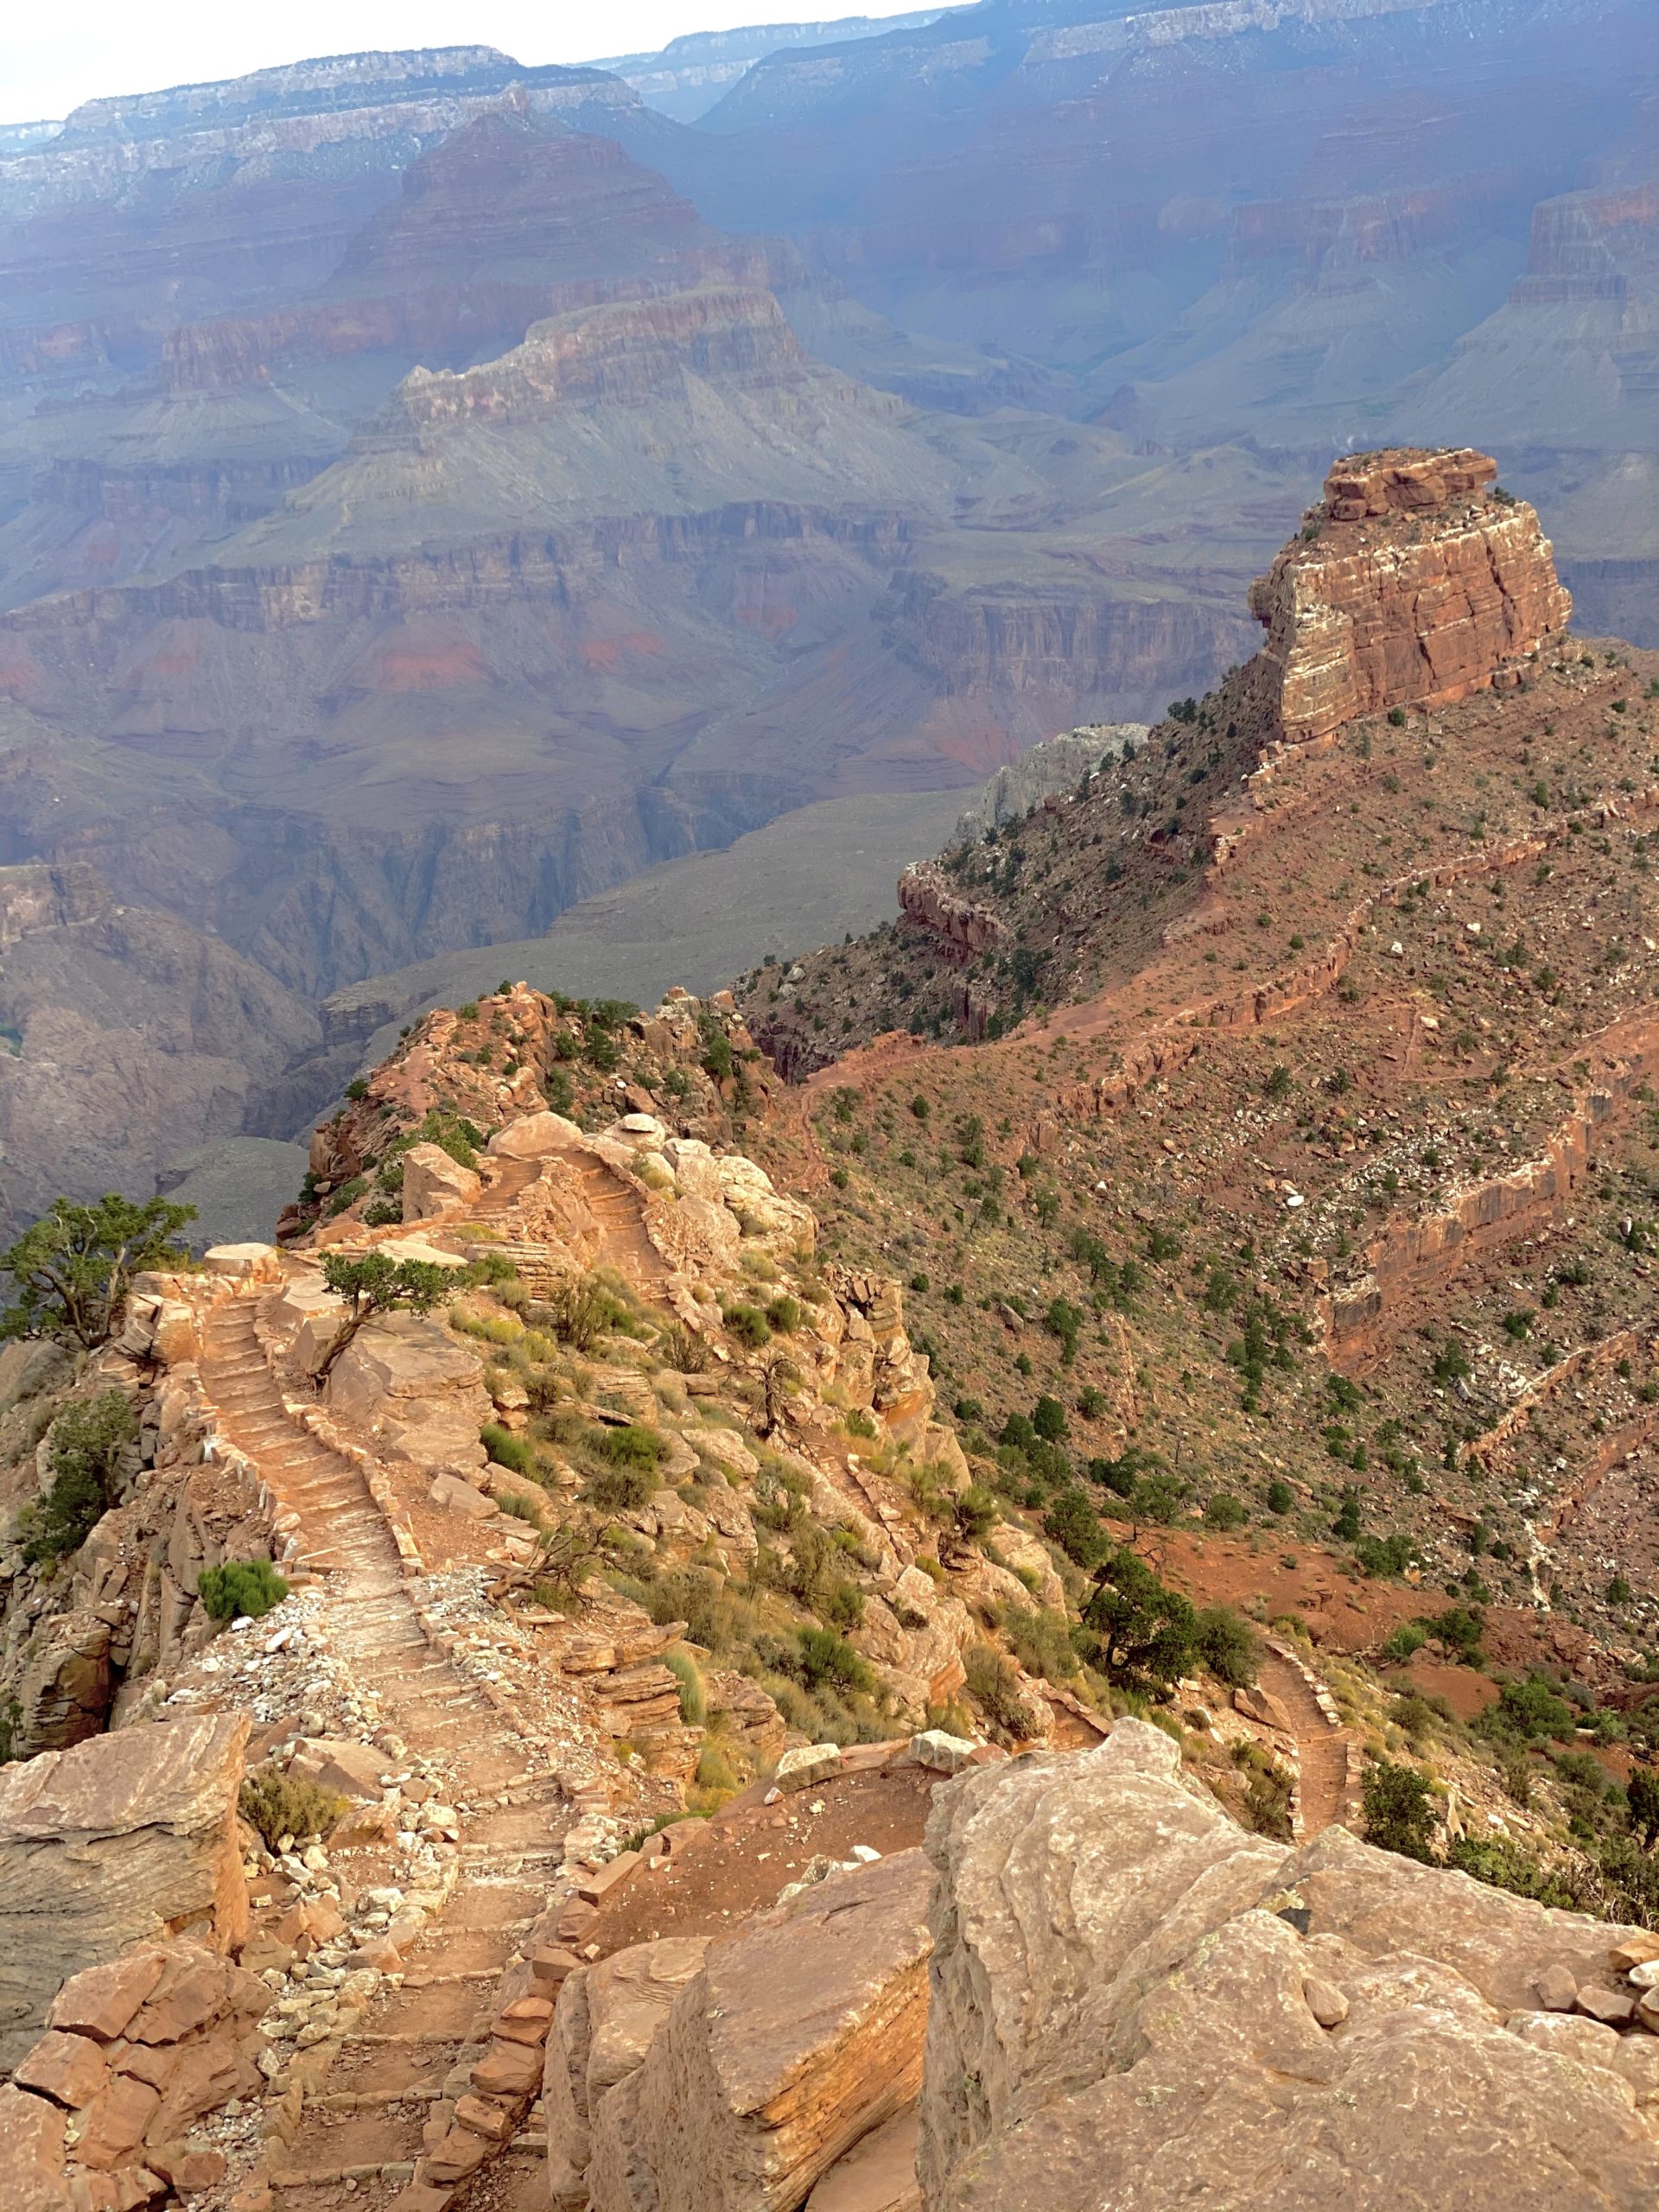 Trail in the Grand Canyon disappearing into distance